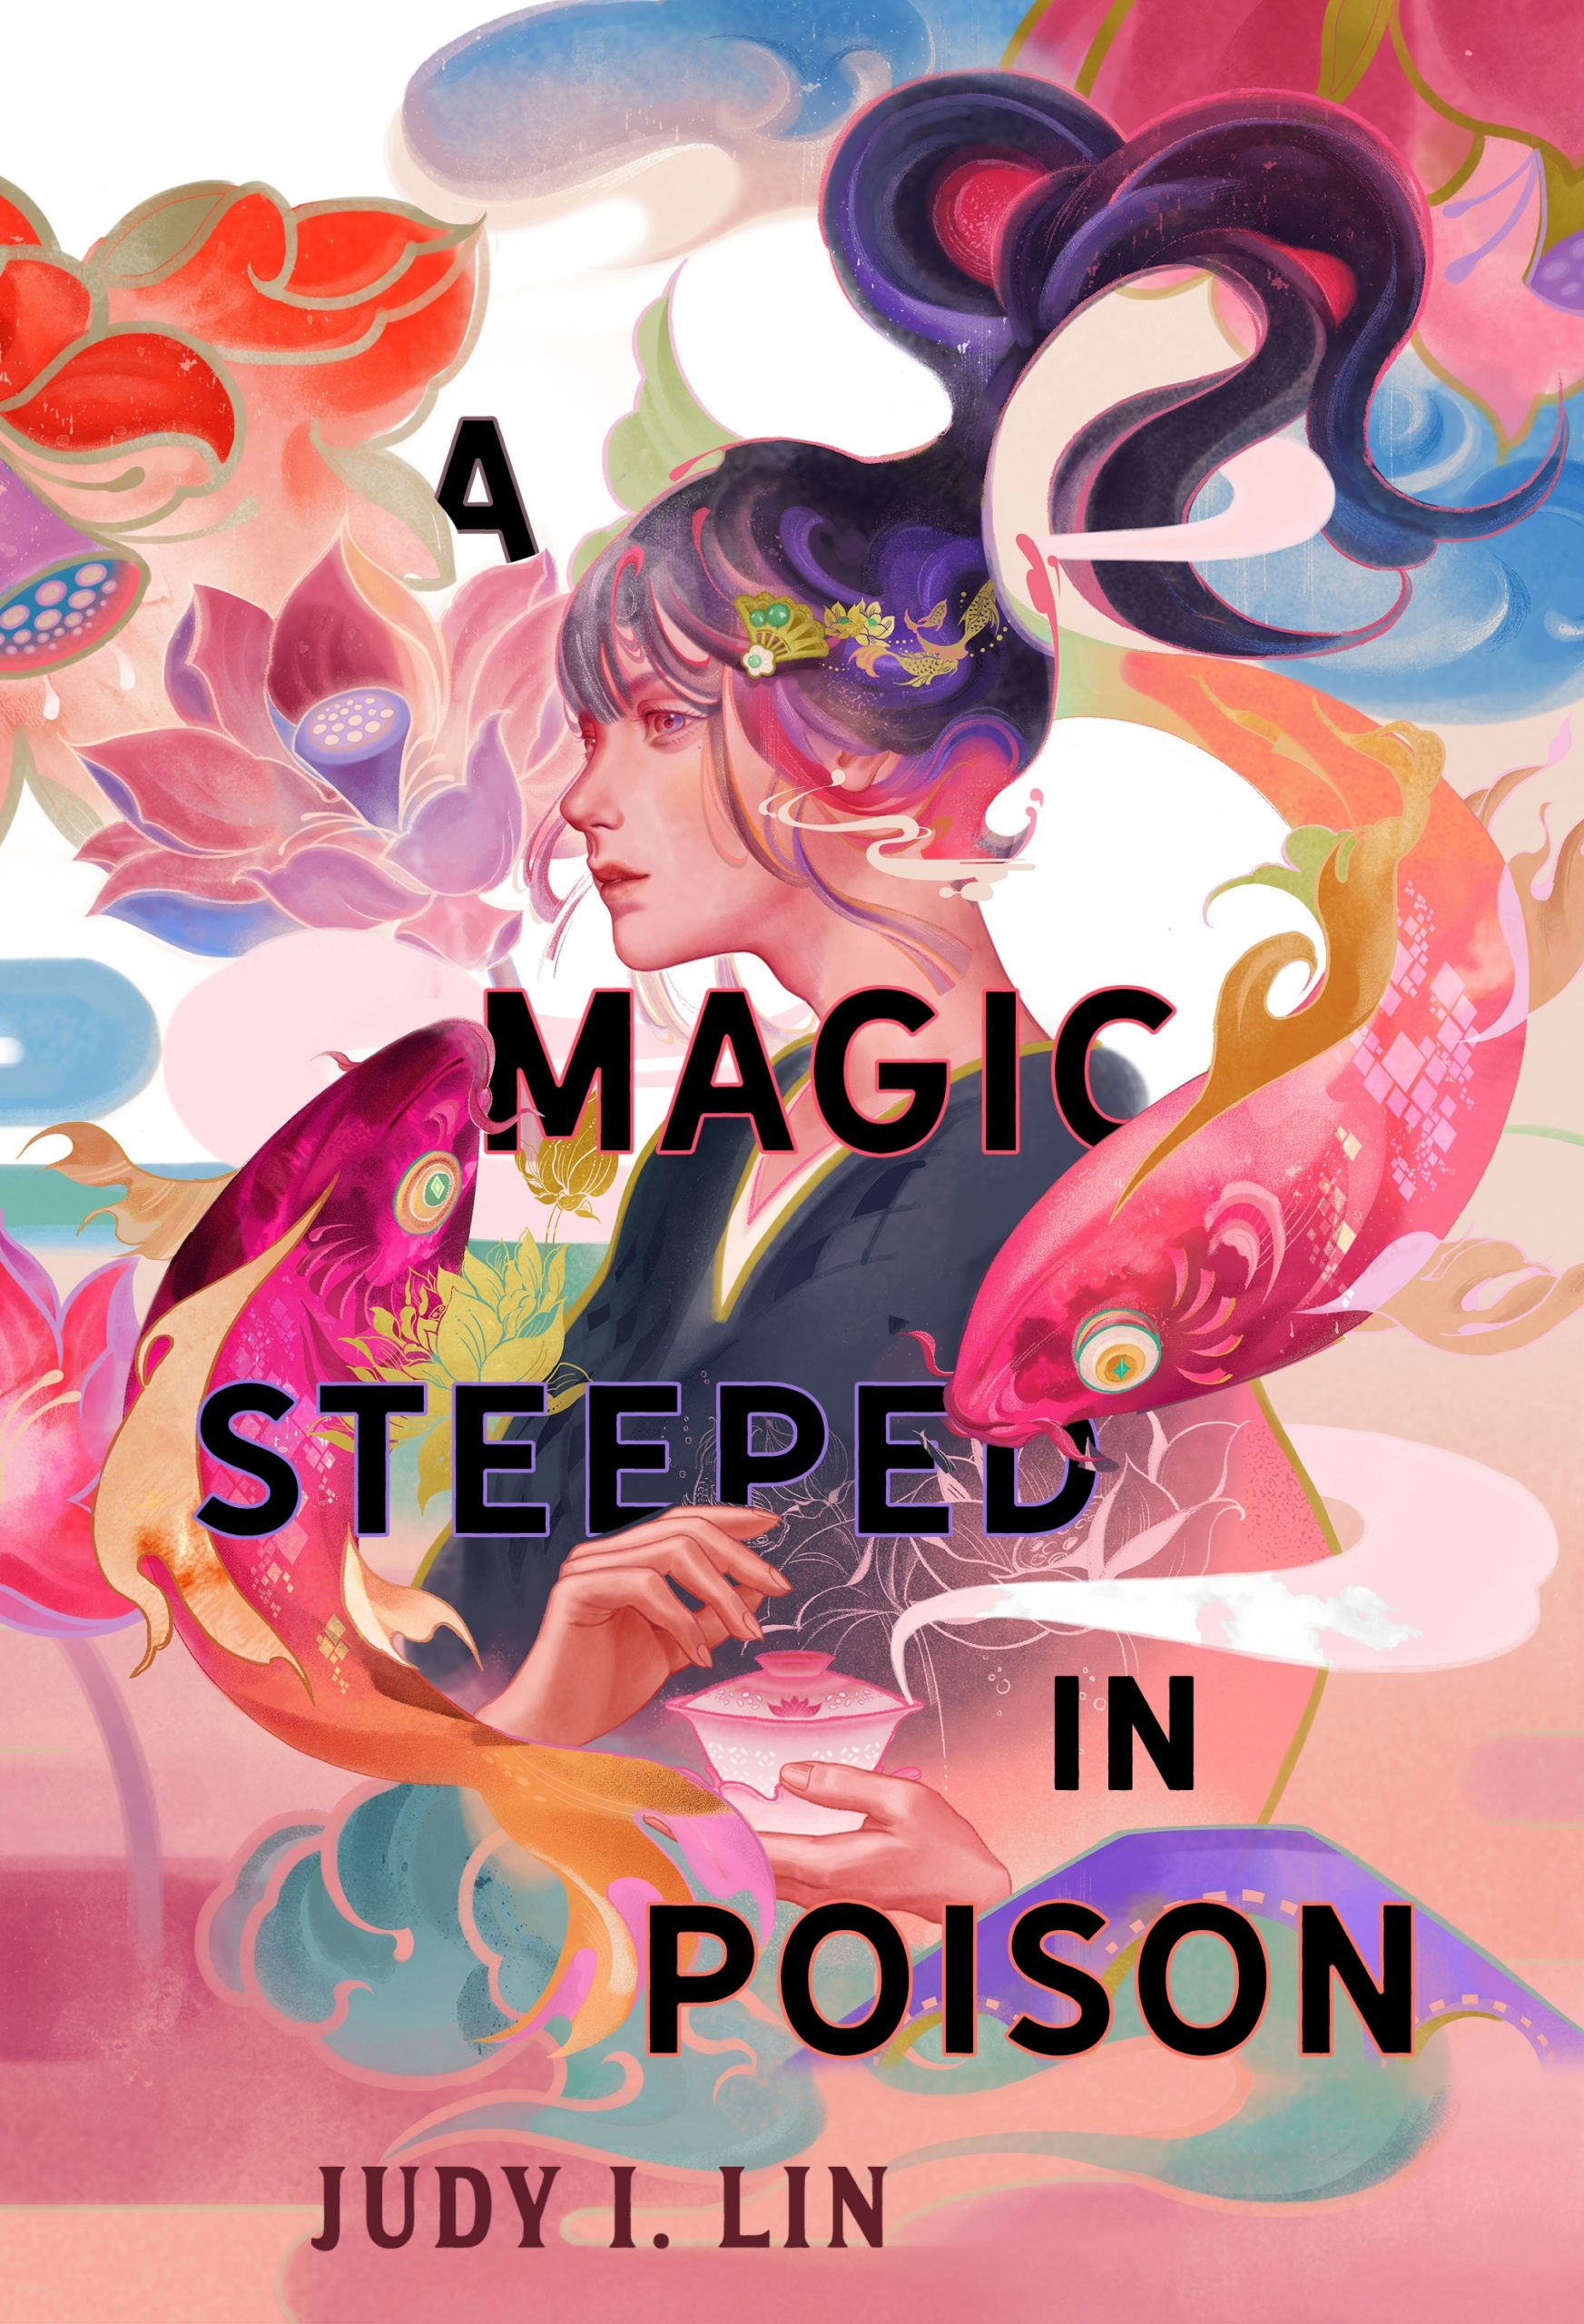 A Magic Steeped in Poison (The Book of Tea, #1)